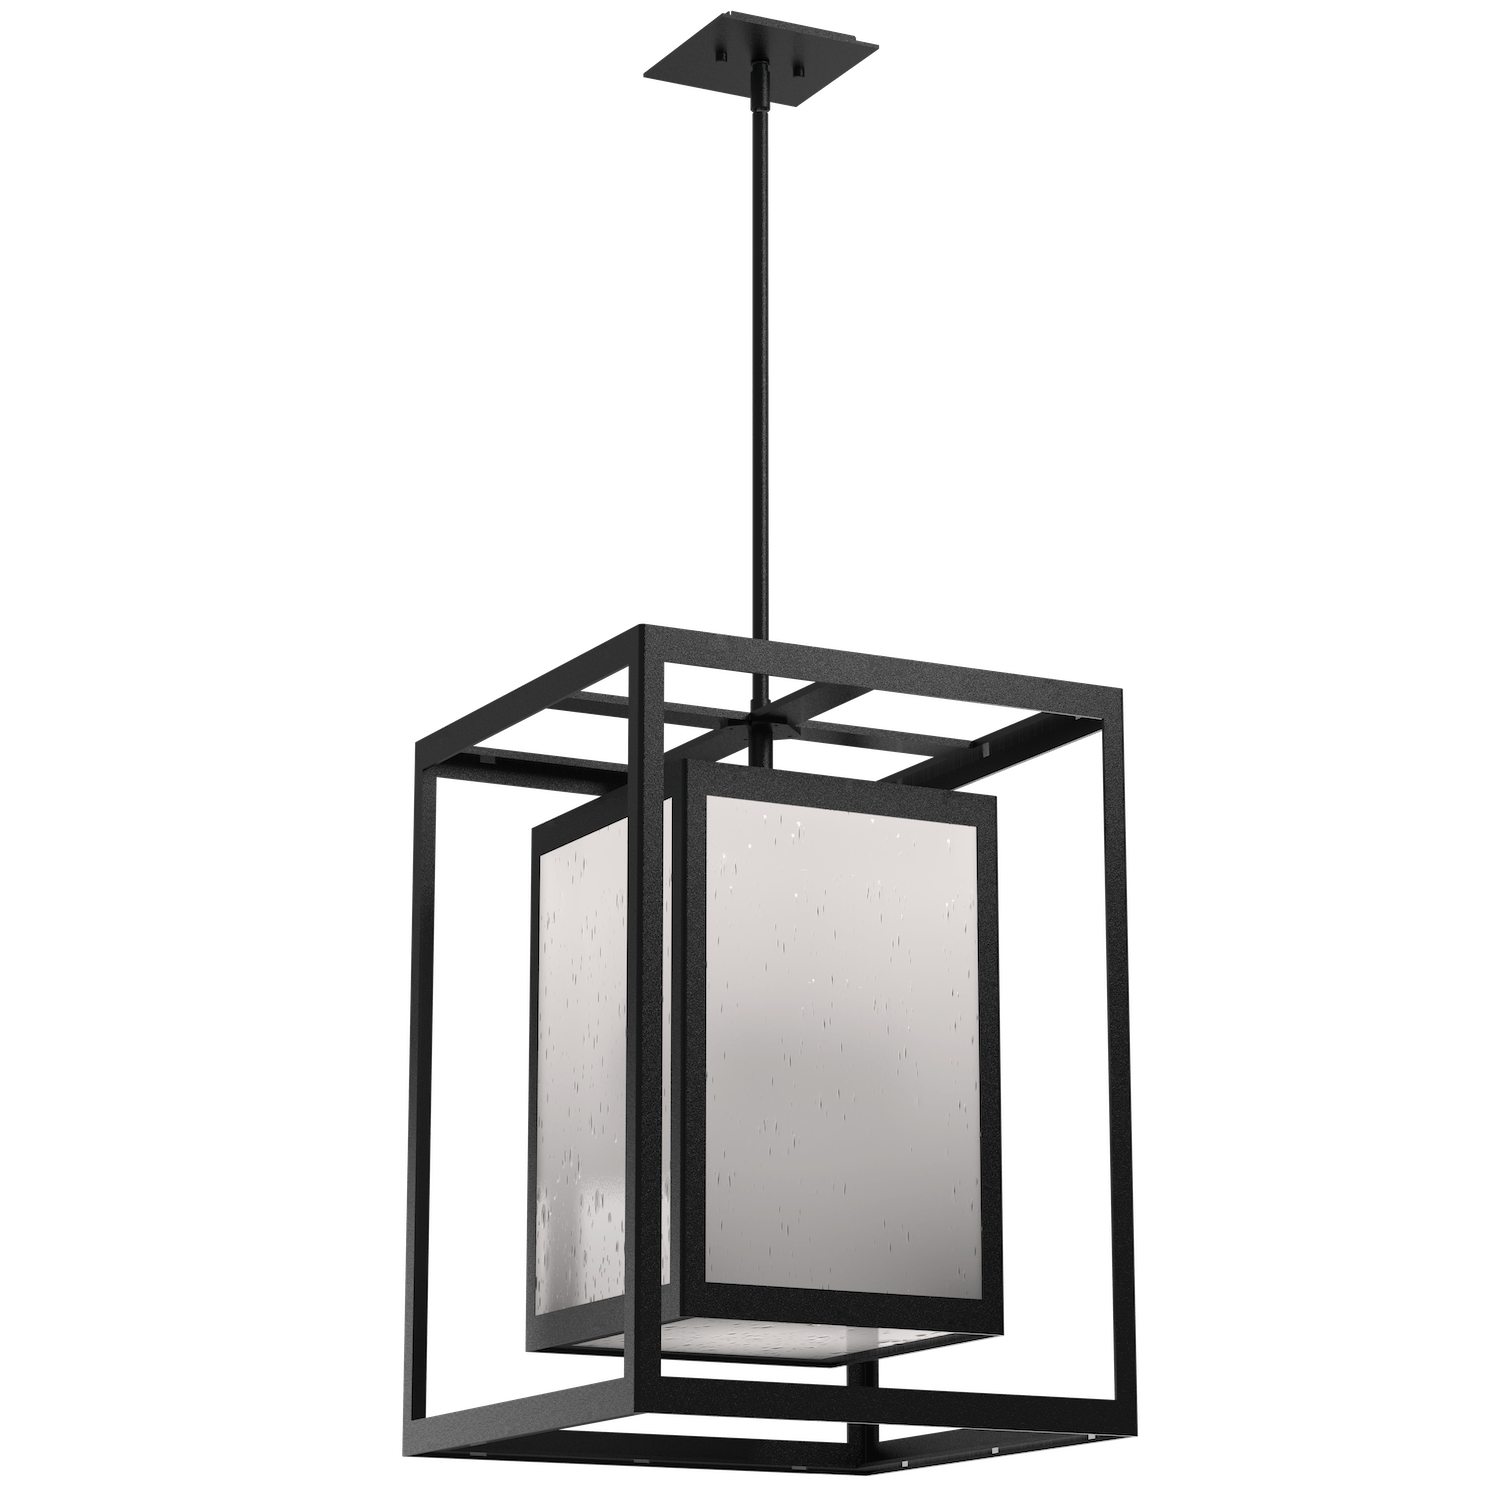 OPB0027-22-TB-FS-Hammerton-Studio-Double-Box-25-inch-outdoor-pendant-light-with-textured-black-finish-and-frosted-glass-shade-and-LED-lamping